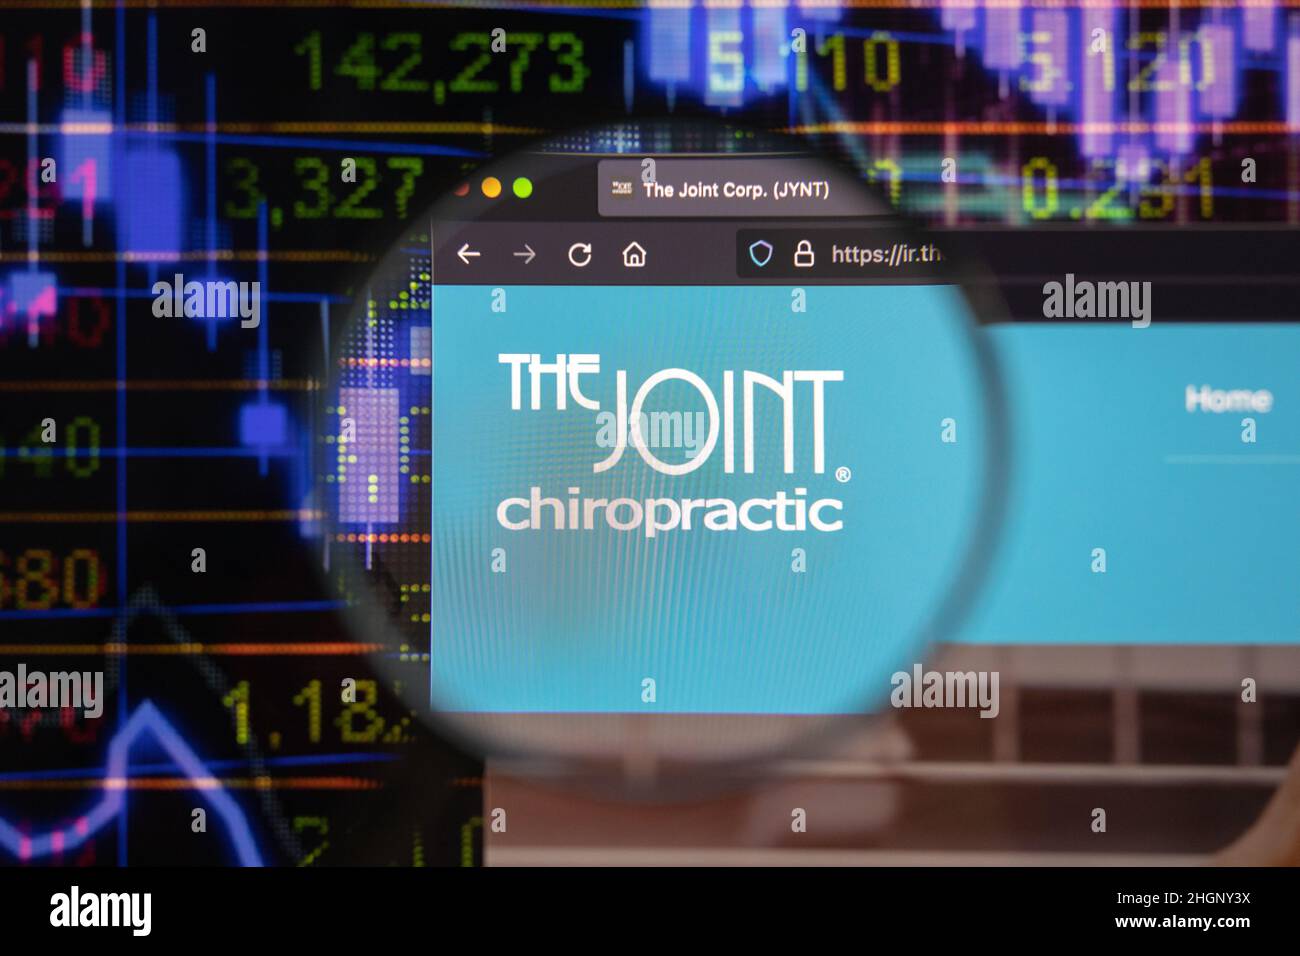 The Joint Chiropractic company logo on a website with blurry stock market developments in the background, seen on a computer screen Stock Photo